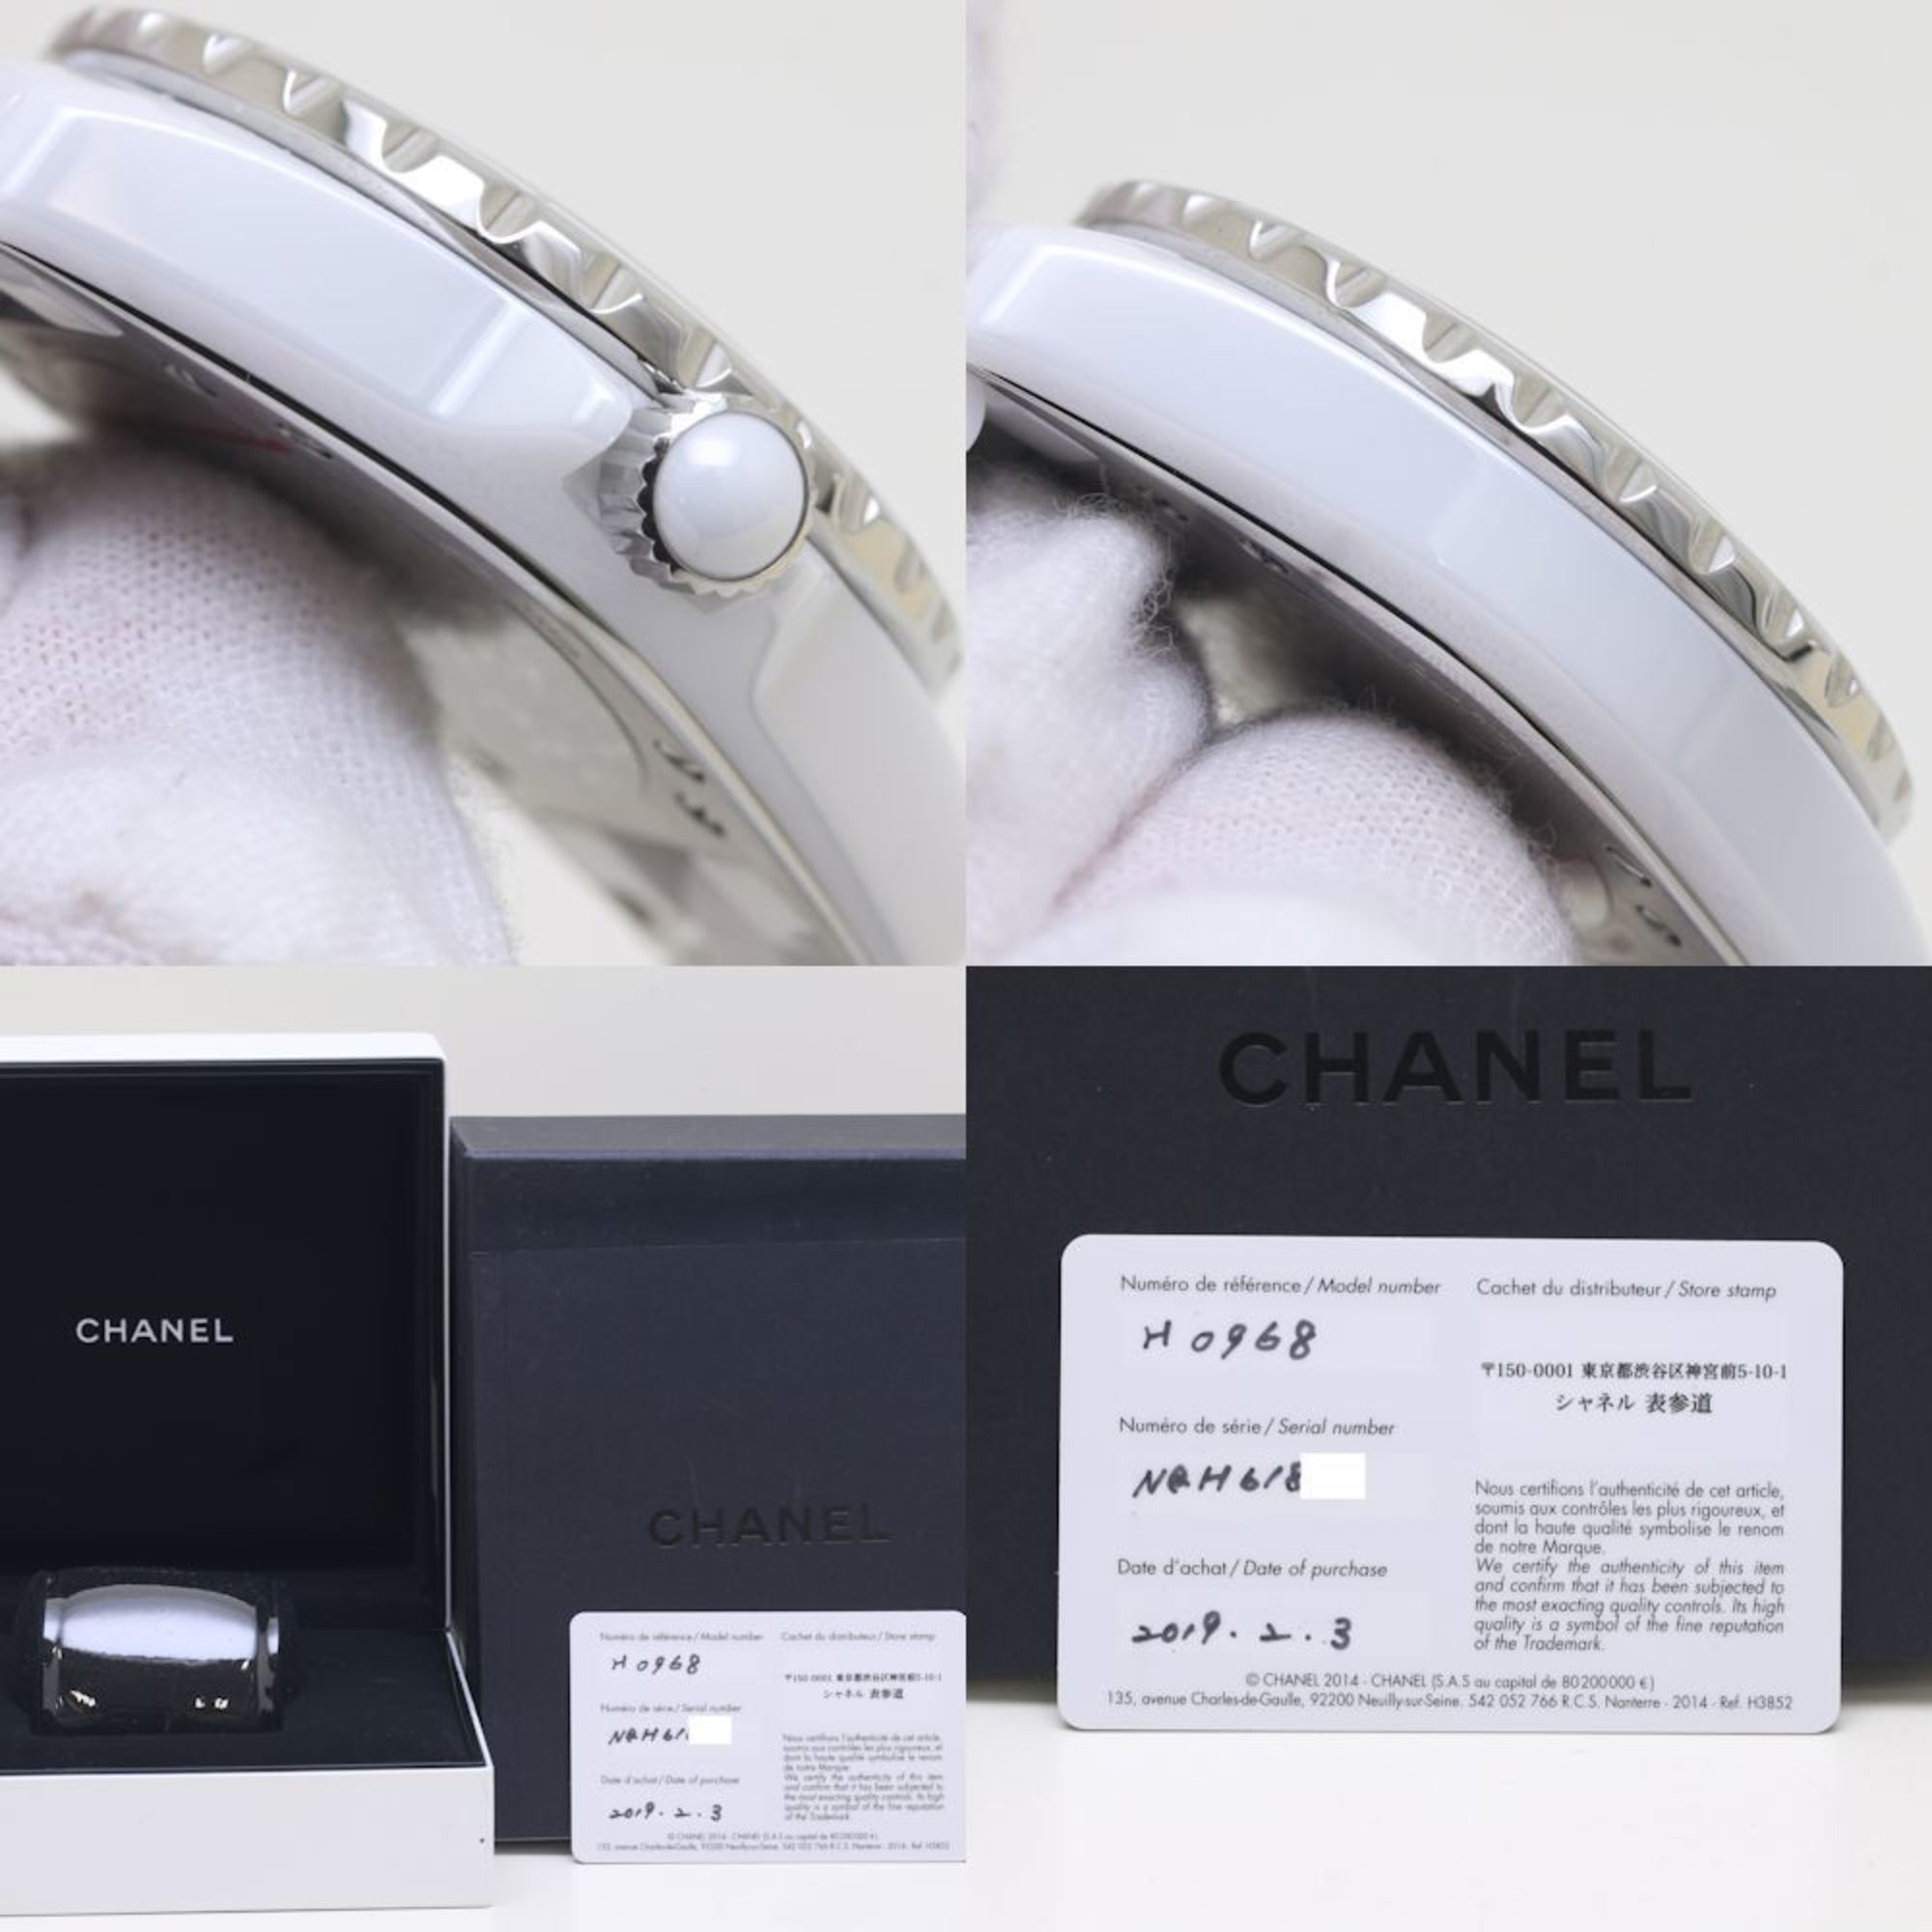 CHANEL J12 Late Model H0968 White Ceramic x Stainless Steel Ladies 39352 Watch